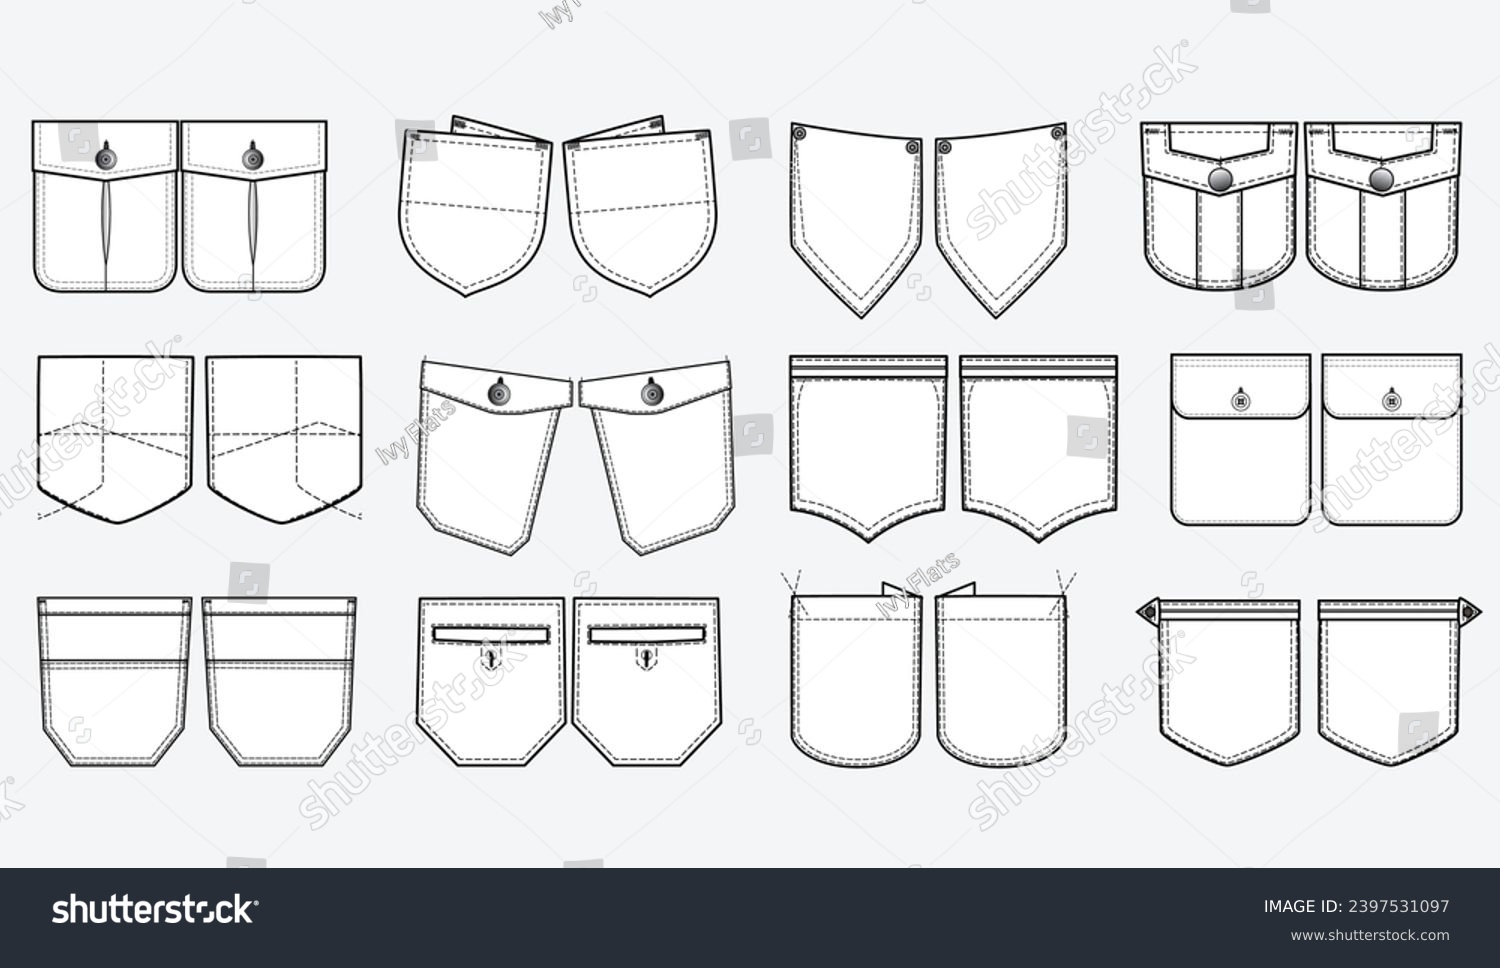 SVG of Jeans and denim Patch pocket flat sketch vector illustration set, different types of Clothing Pockets for jeans pocket, sleeve arm, cargo pants, dresses, bag, garments, Clothing and Accessories svg